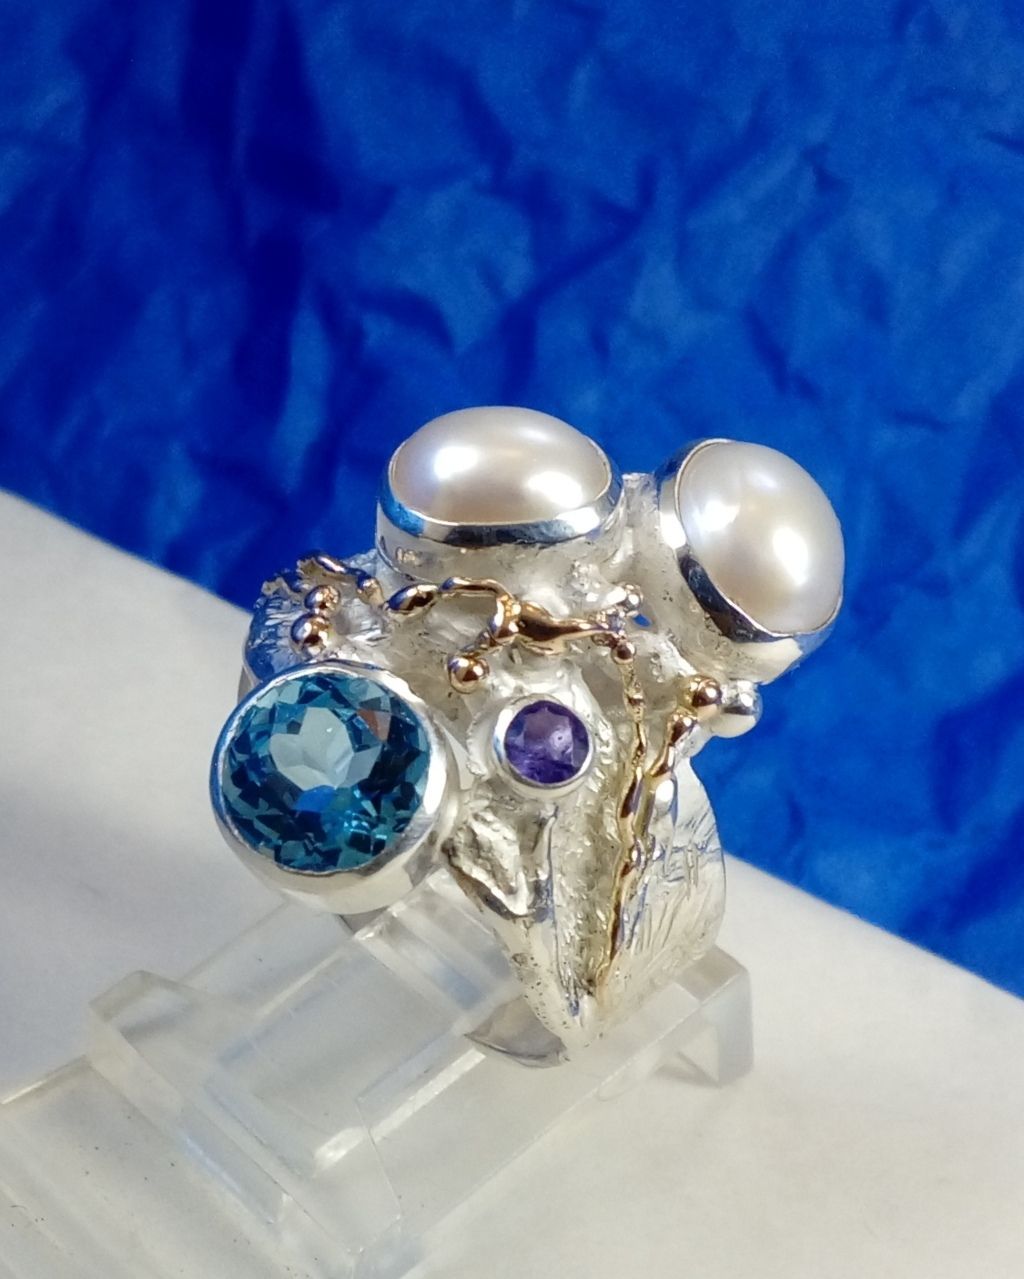 new gregory pyra piro art jewelry, specific niche artisan jewelry, Gregory Pyra Piro ring 7320, jewelry with amethyst and blue topaz together, rings for women with topaz and pearl together, rings for women with amethyst and pearl together,jewellery artist in Europe, designer jewellery sold at auctions and art galleries, where to find auctions with fine art and designer jewellery, bidding on auctions with designer jewellery, rings for women with amethyst and blutopaz, rings sold in art and craft galleries